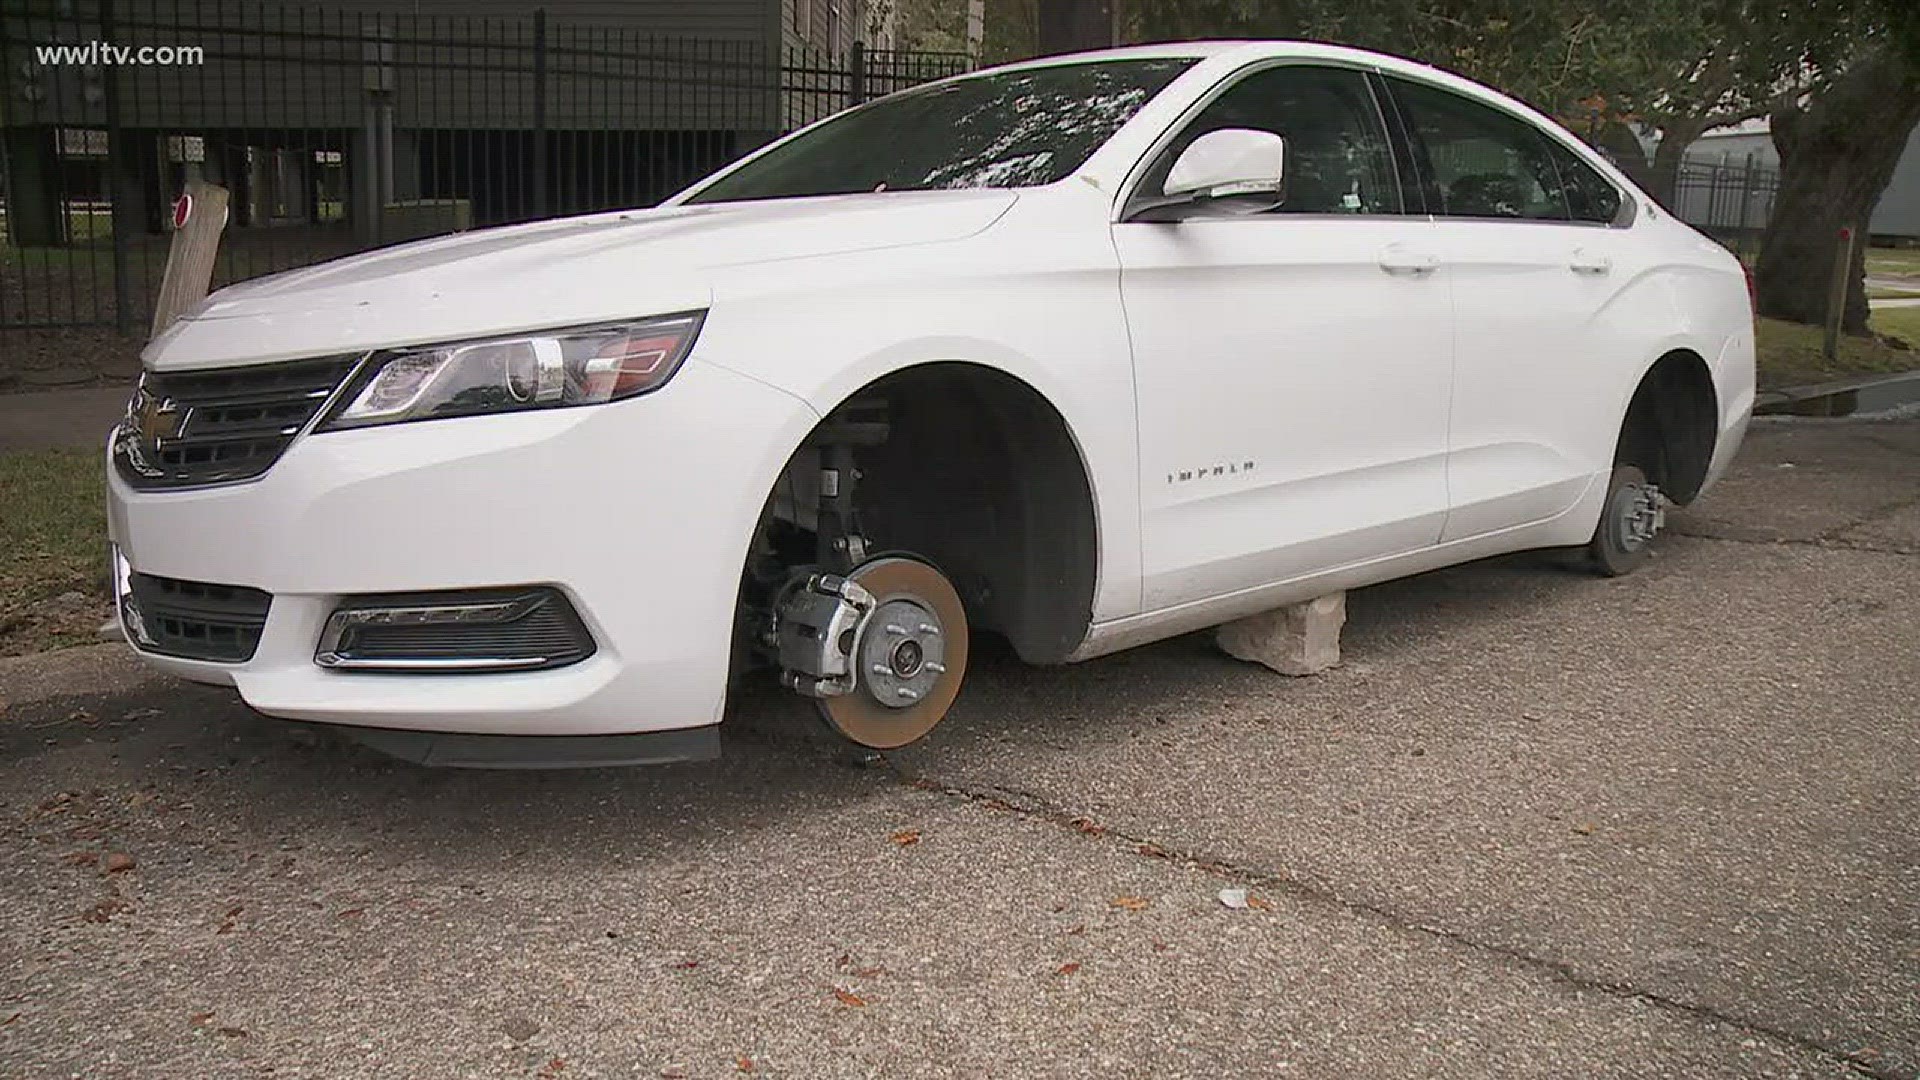 A thief was caught on camera stealing the tires off a parked car in Gentilly.It only took him four minutes to get all four tires off the car and drive away.